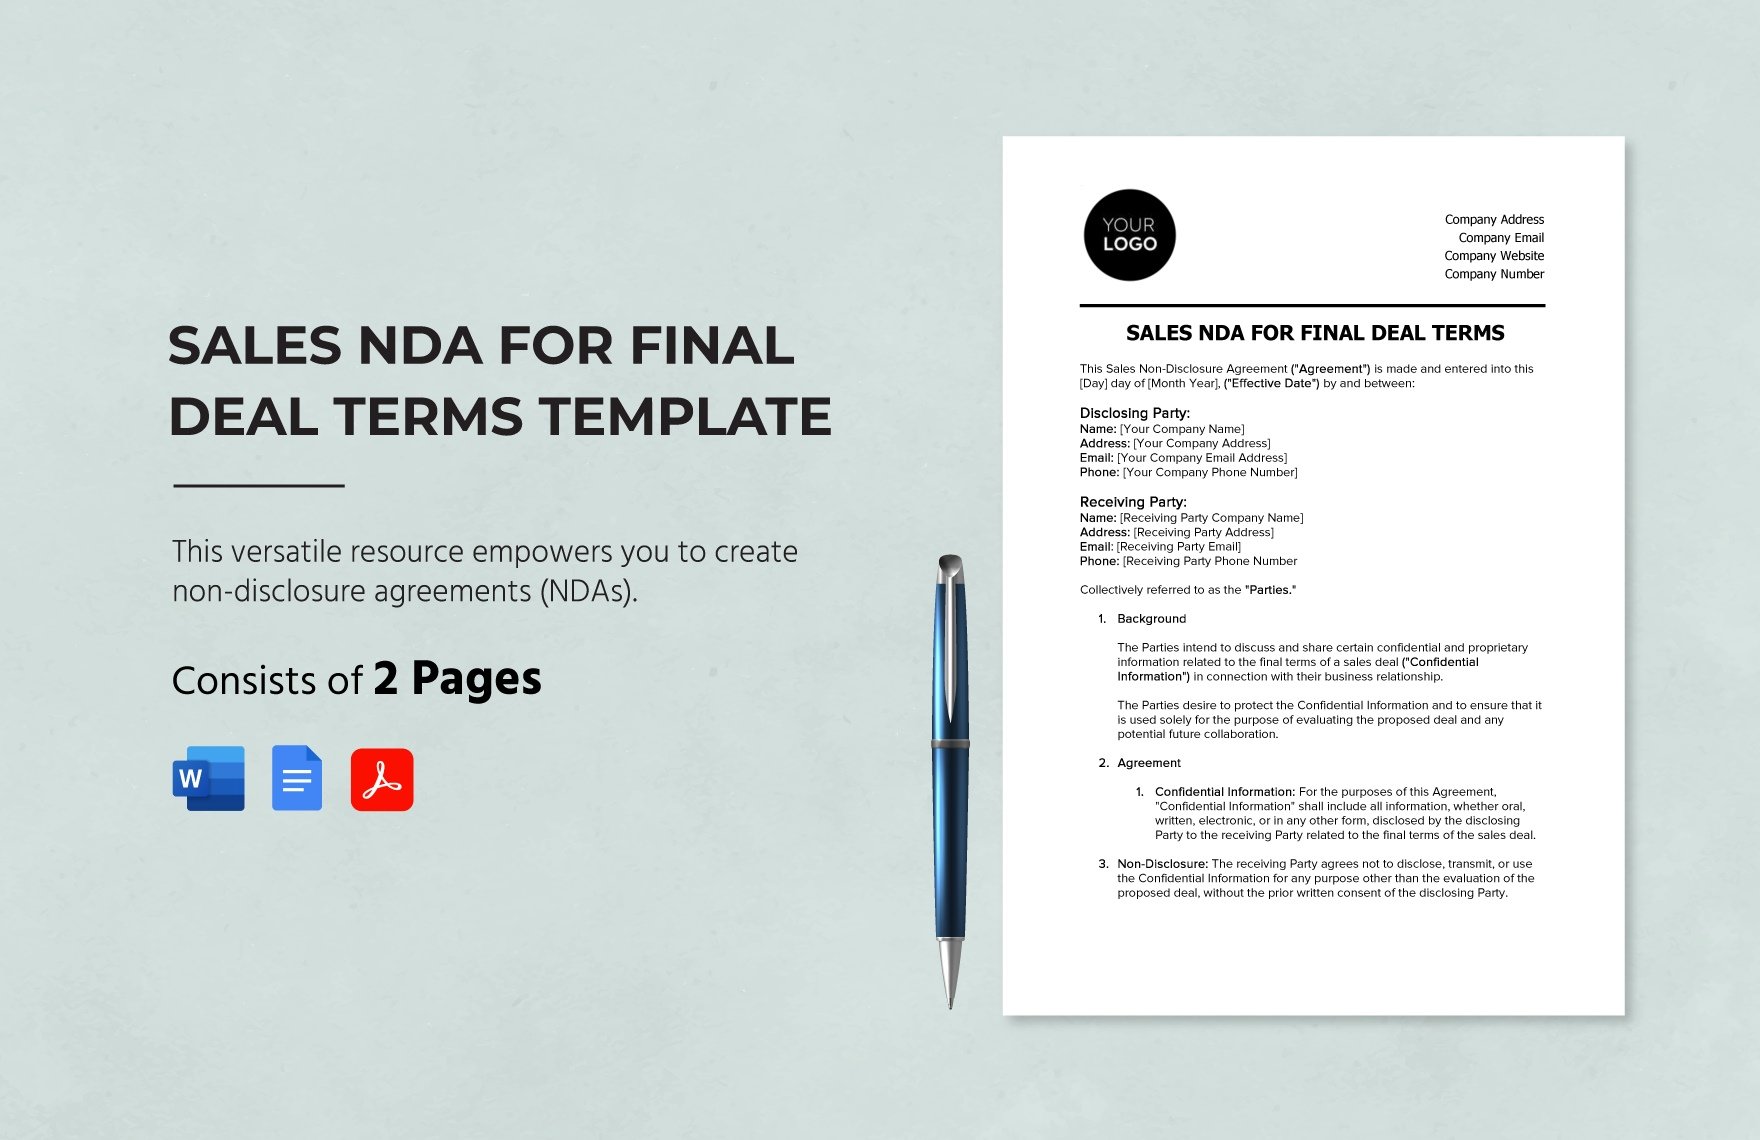 Sales NDA for Final Deal Terms Template in Word, Google Docs, PDF